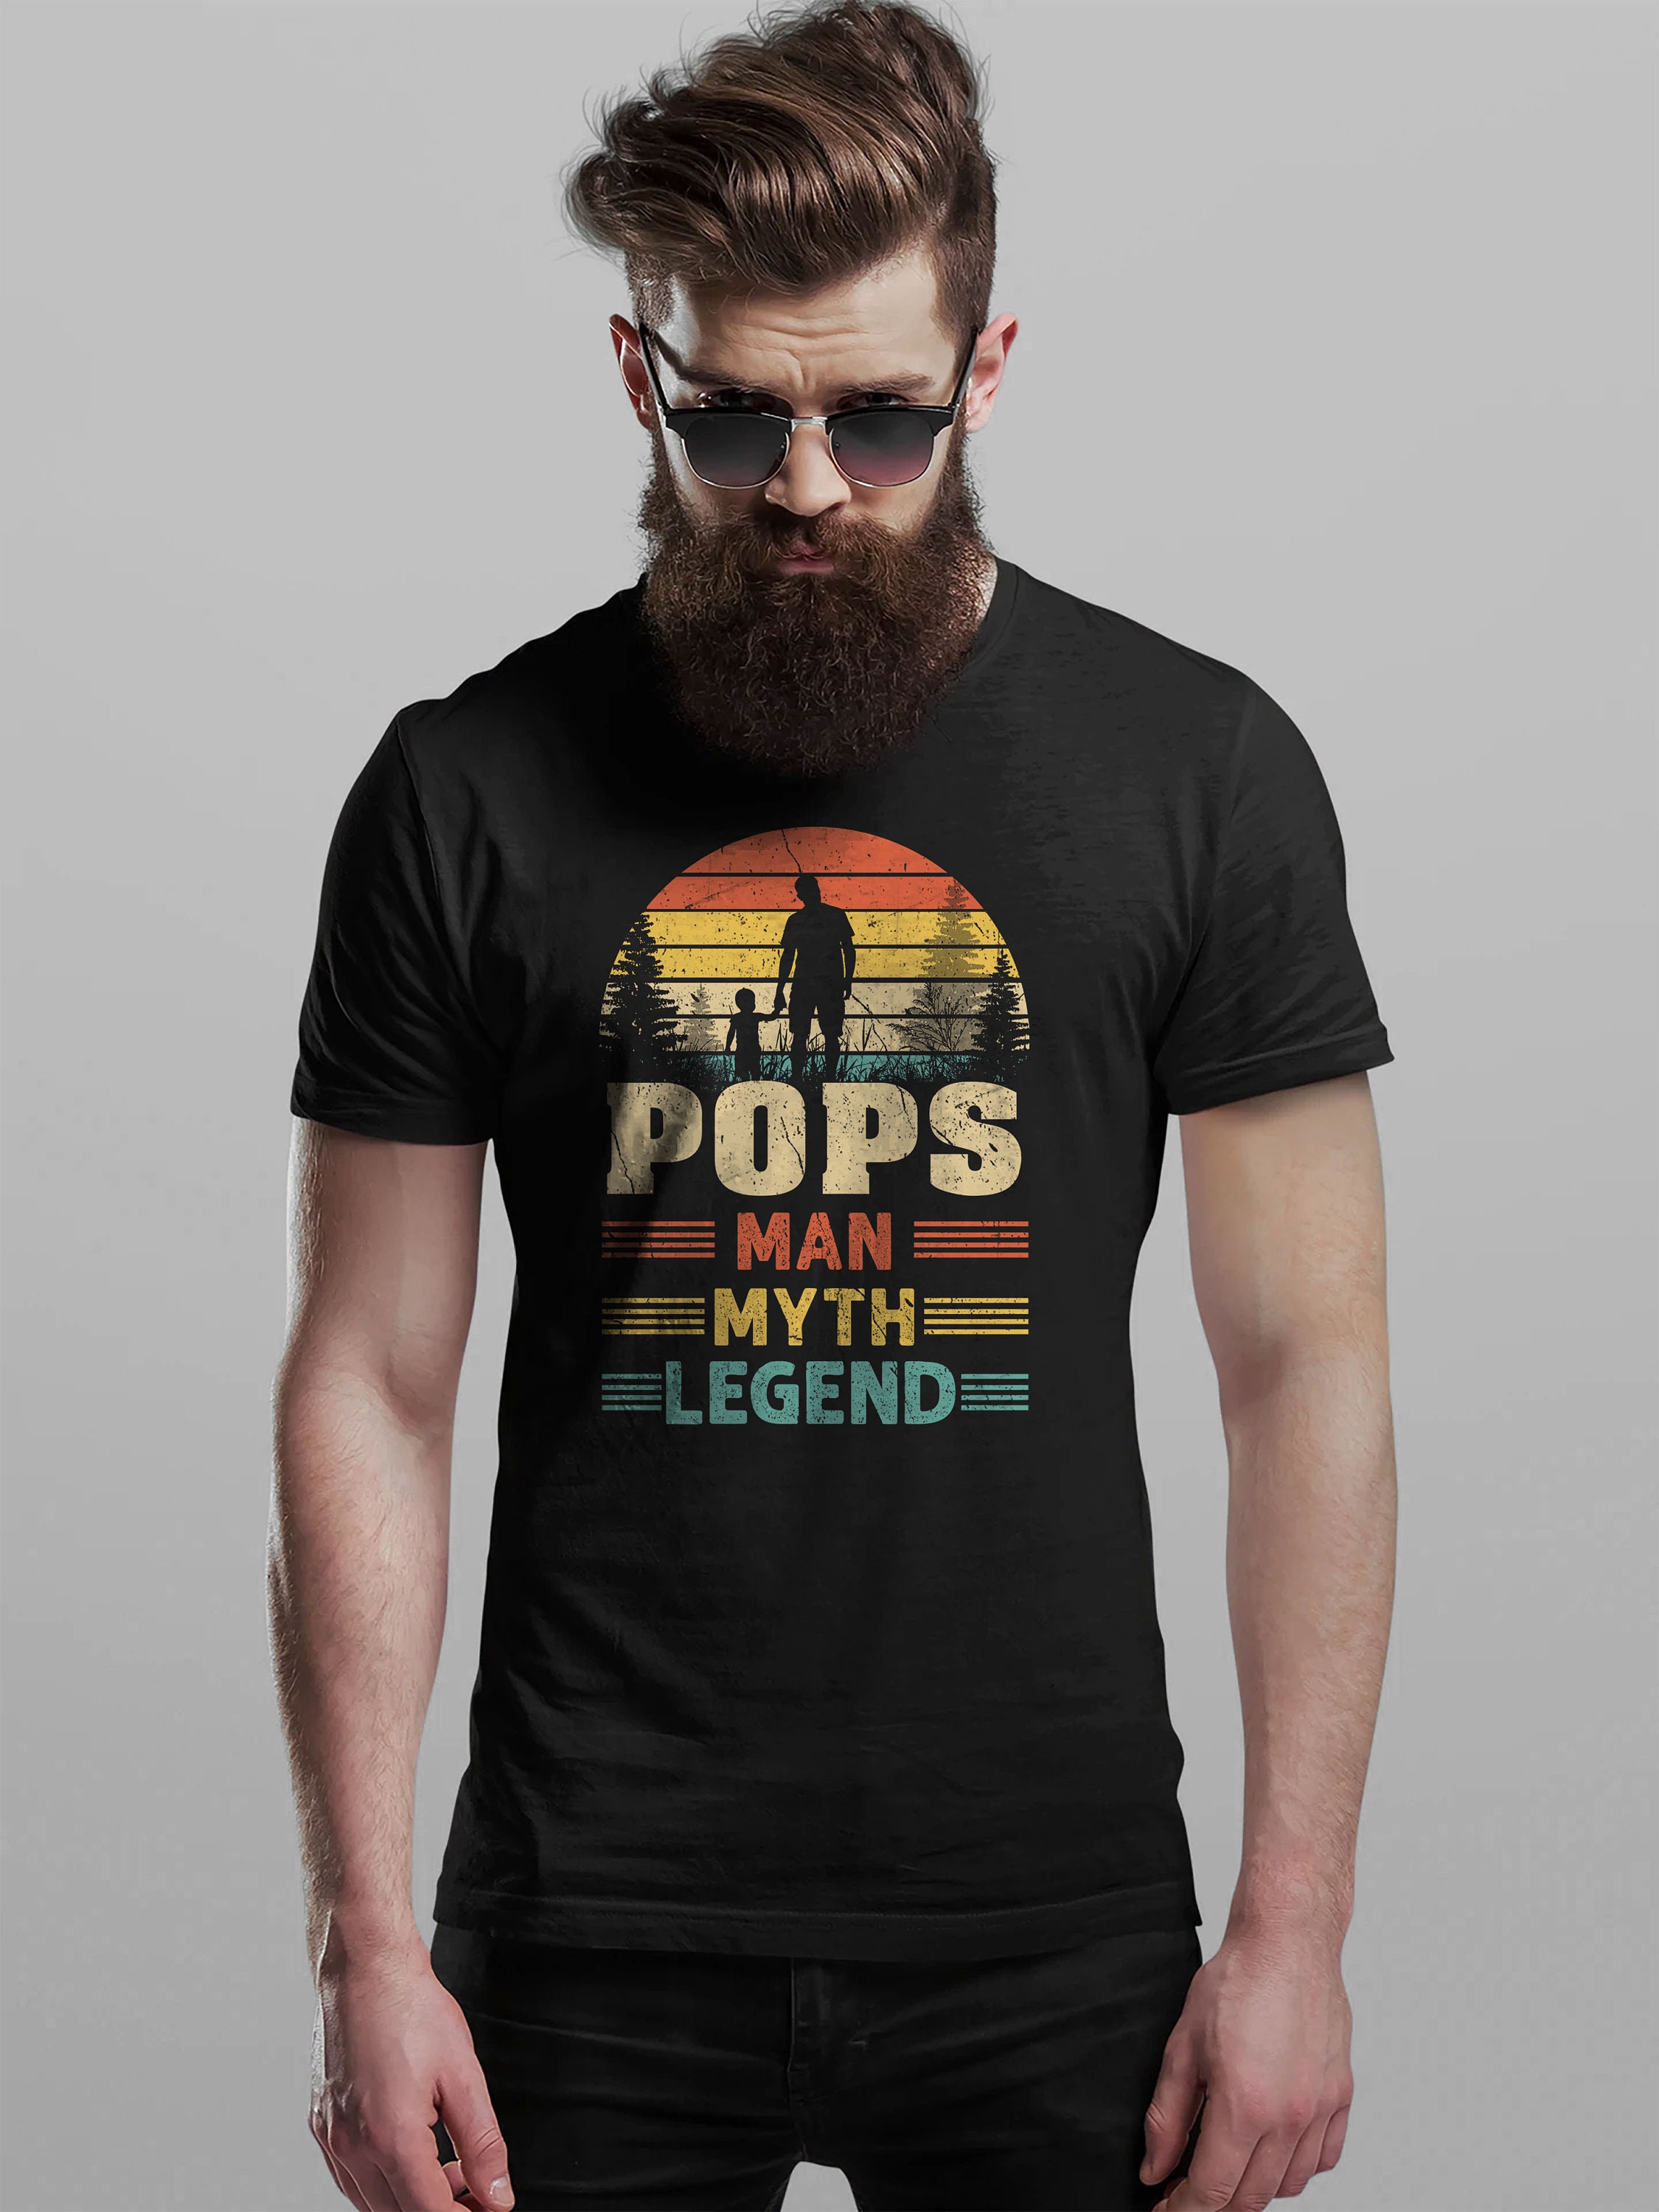 Pops Sunset Man Myth Legend Men’s T-Shirt Cool Fun Dad Shirt Christmas Gift Present Fathers Day Top